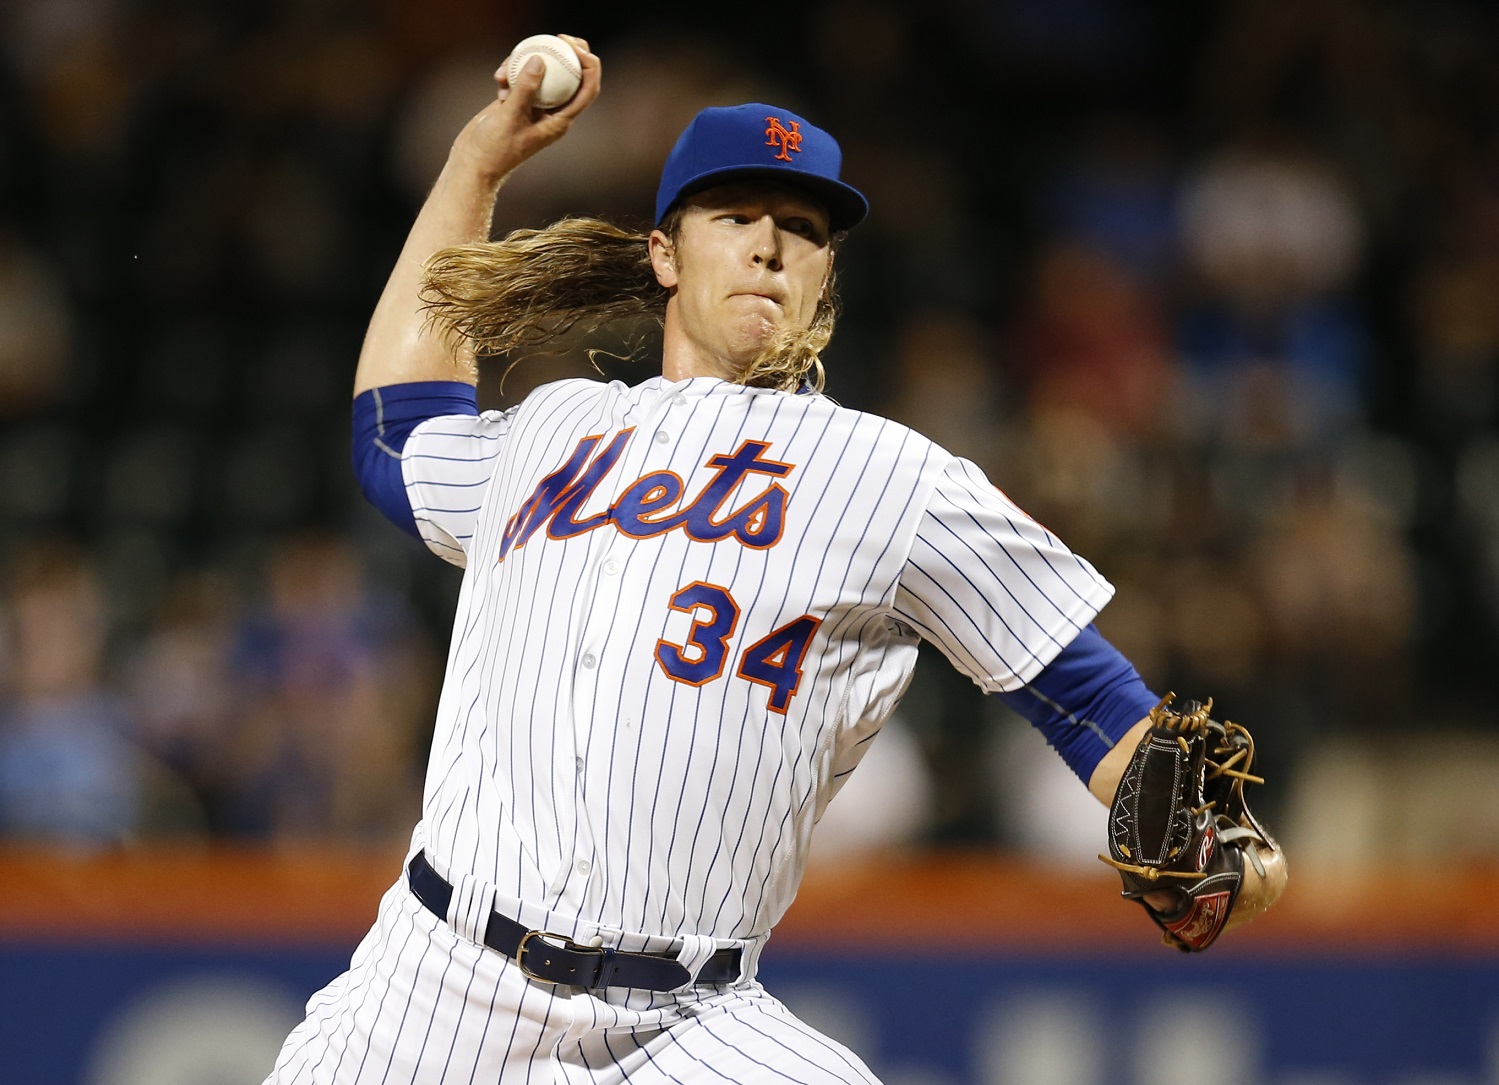 New York Mets starting pitcher Noah Syndergaard (34) delivers during the first inning of a baseball game against the Atlanta Braves, Monday, Sept. 19, 2016, in New York.  (AP Photo/Kathy Willens)